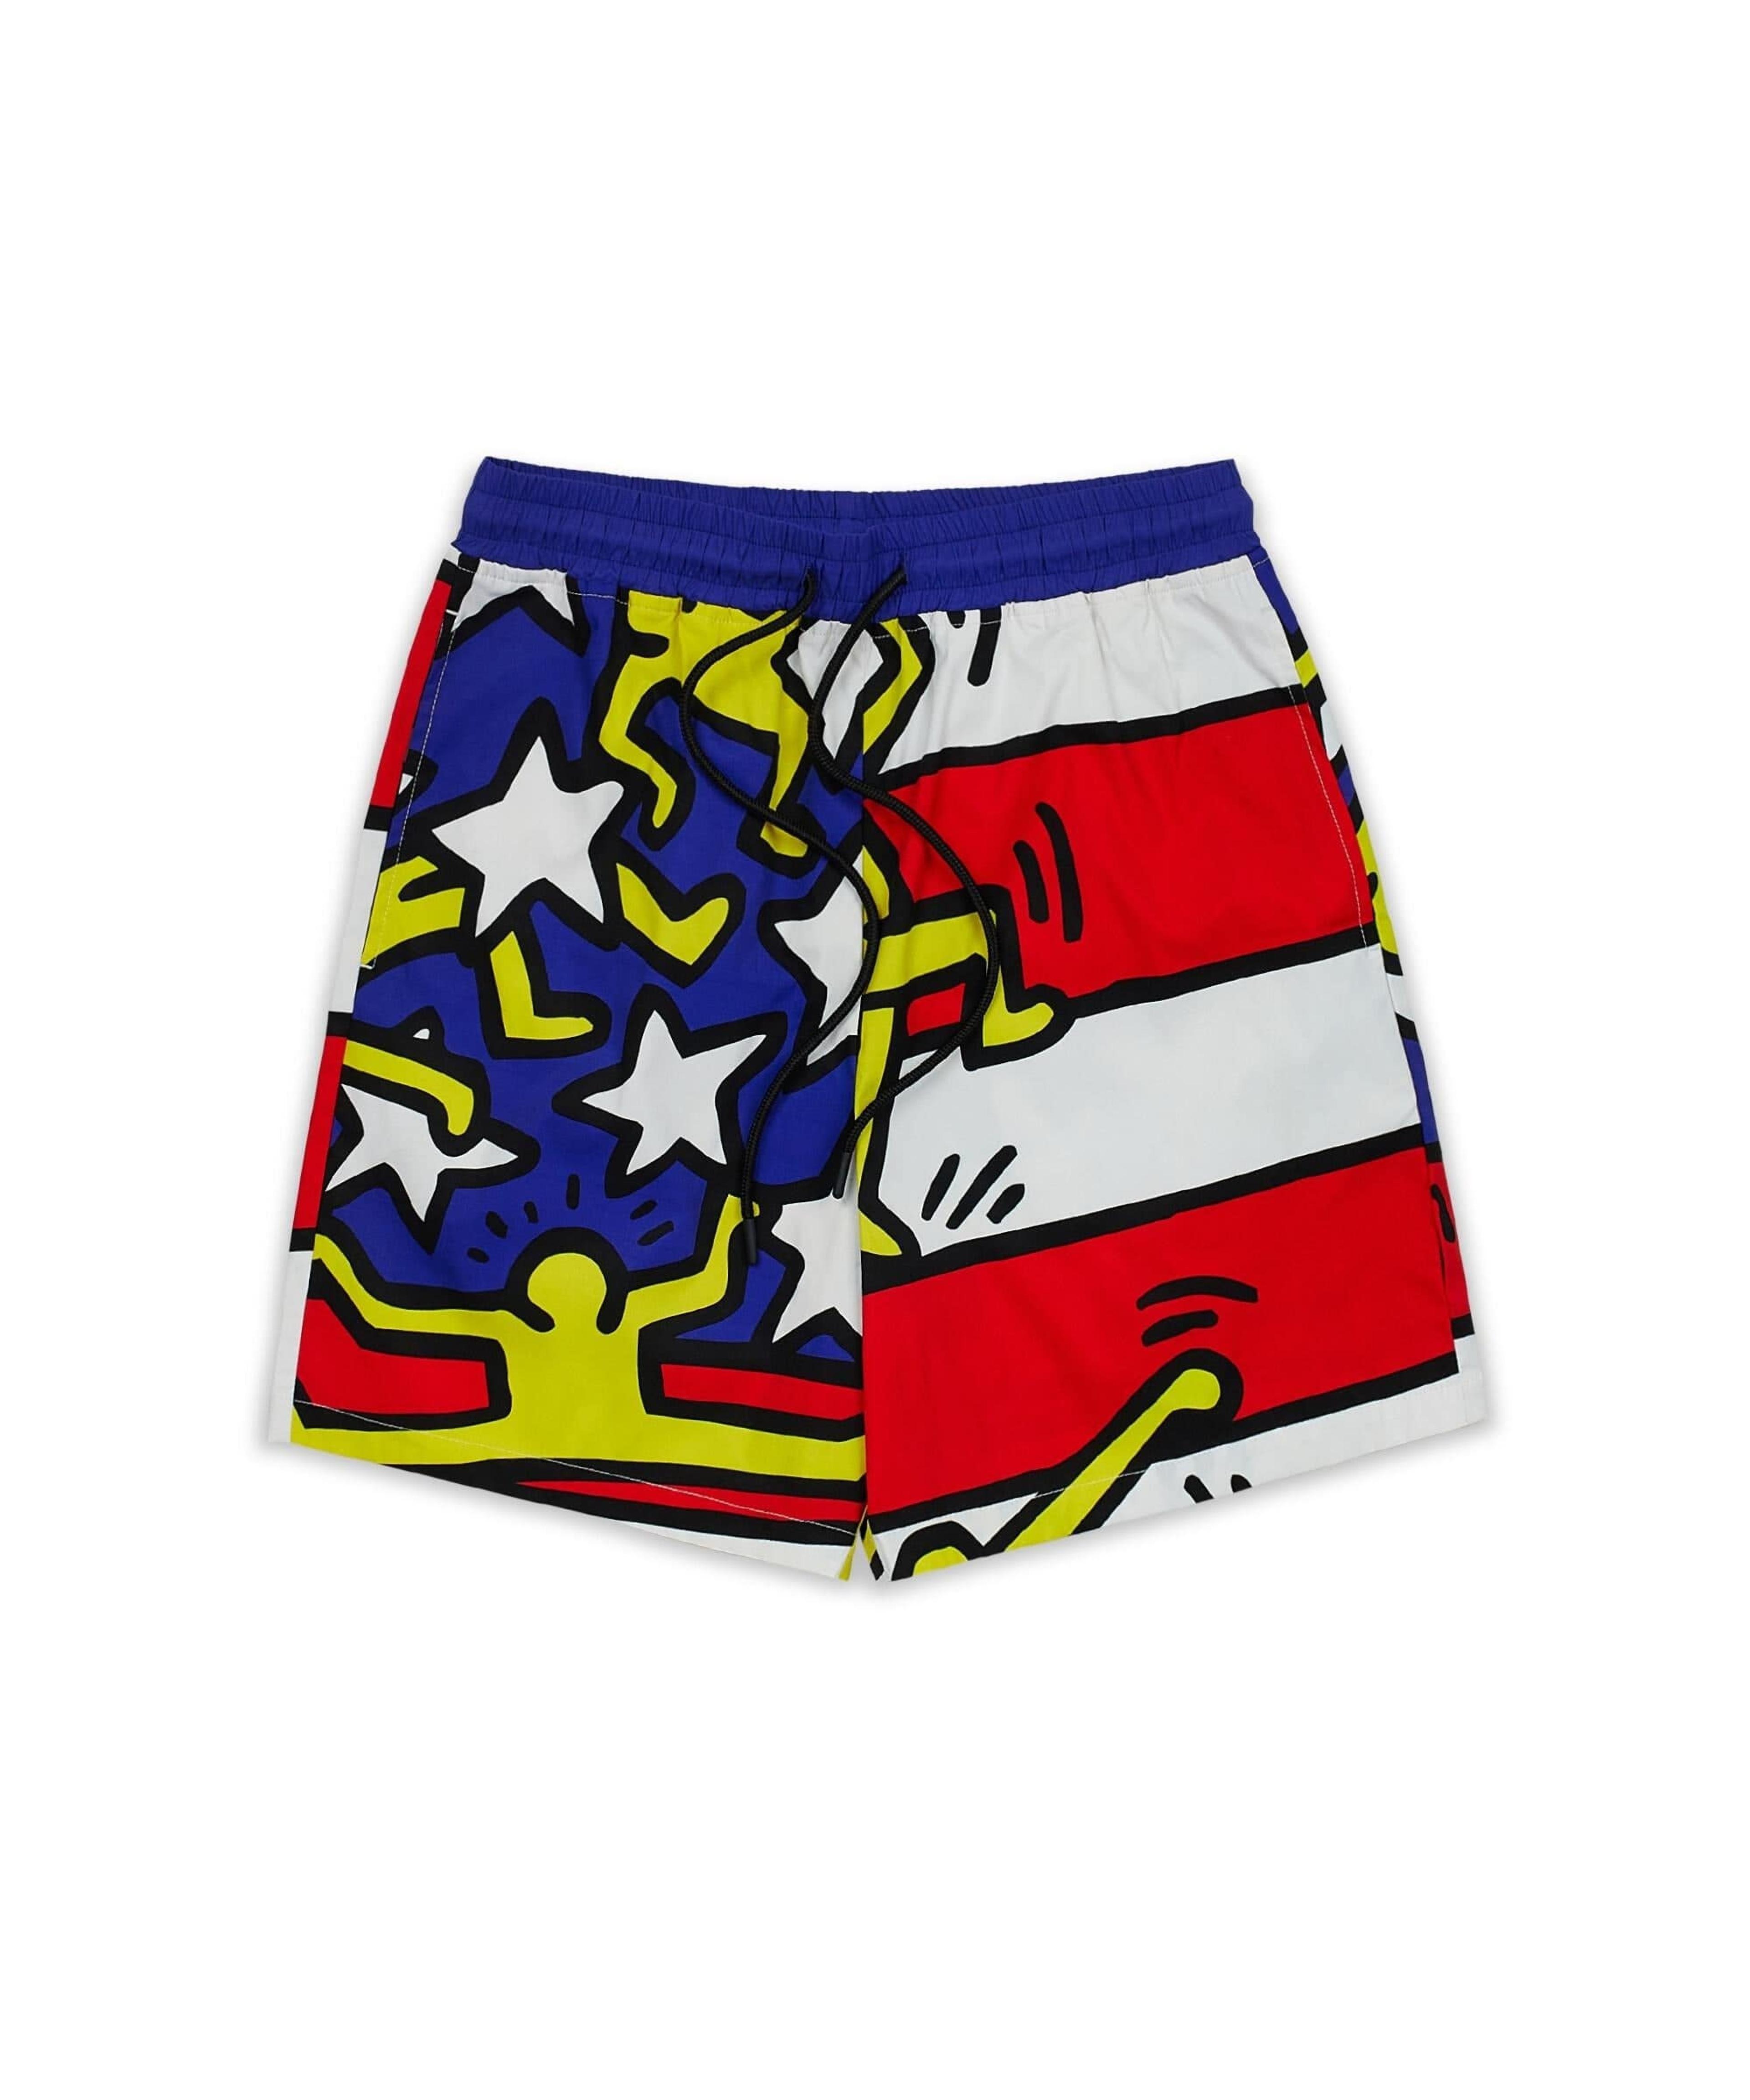 Alternate View 5 of Keith Haring American Flag Shorts